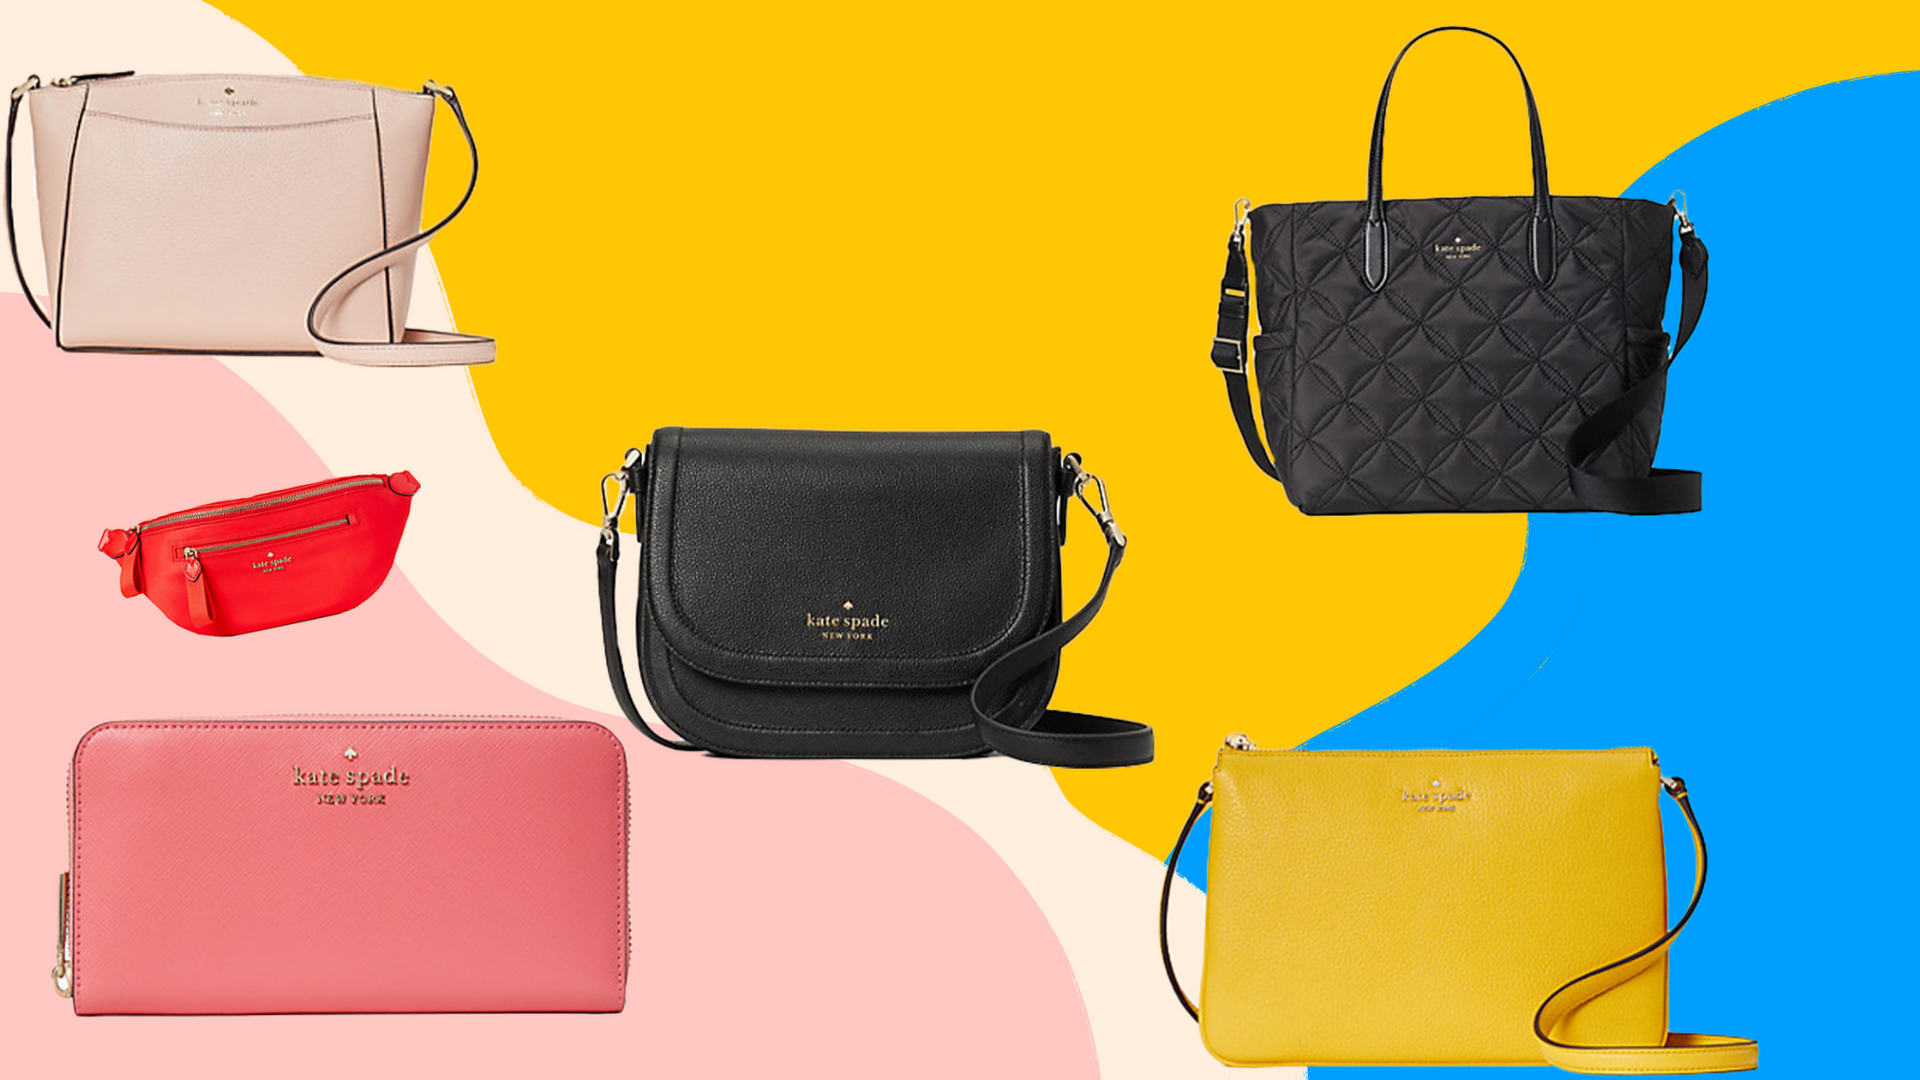 Kate Spade purse: Shop top-rated picks now at the Surprise sale